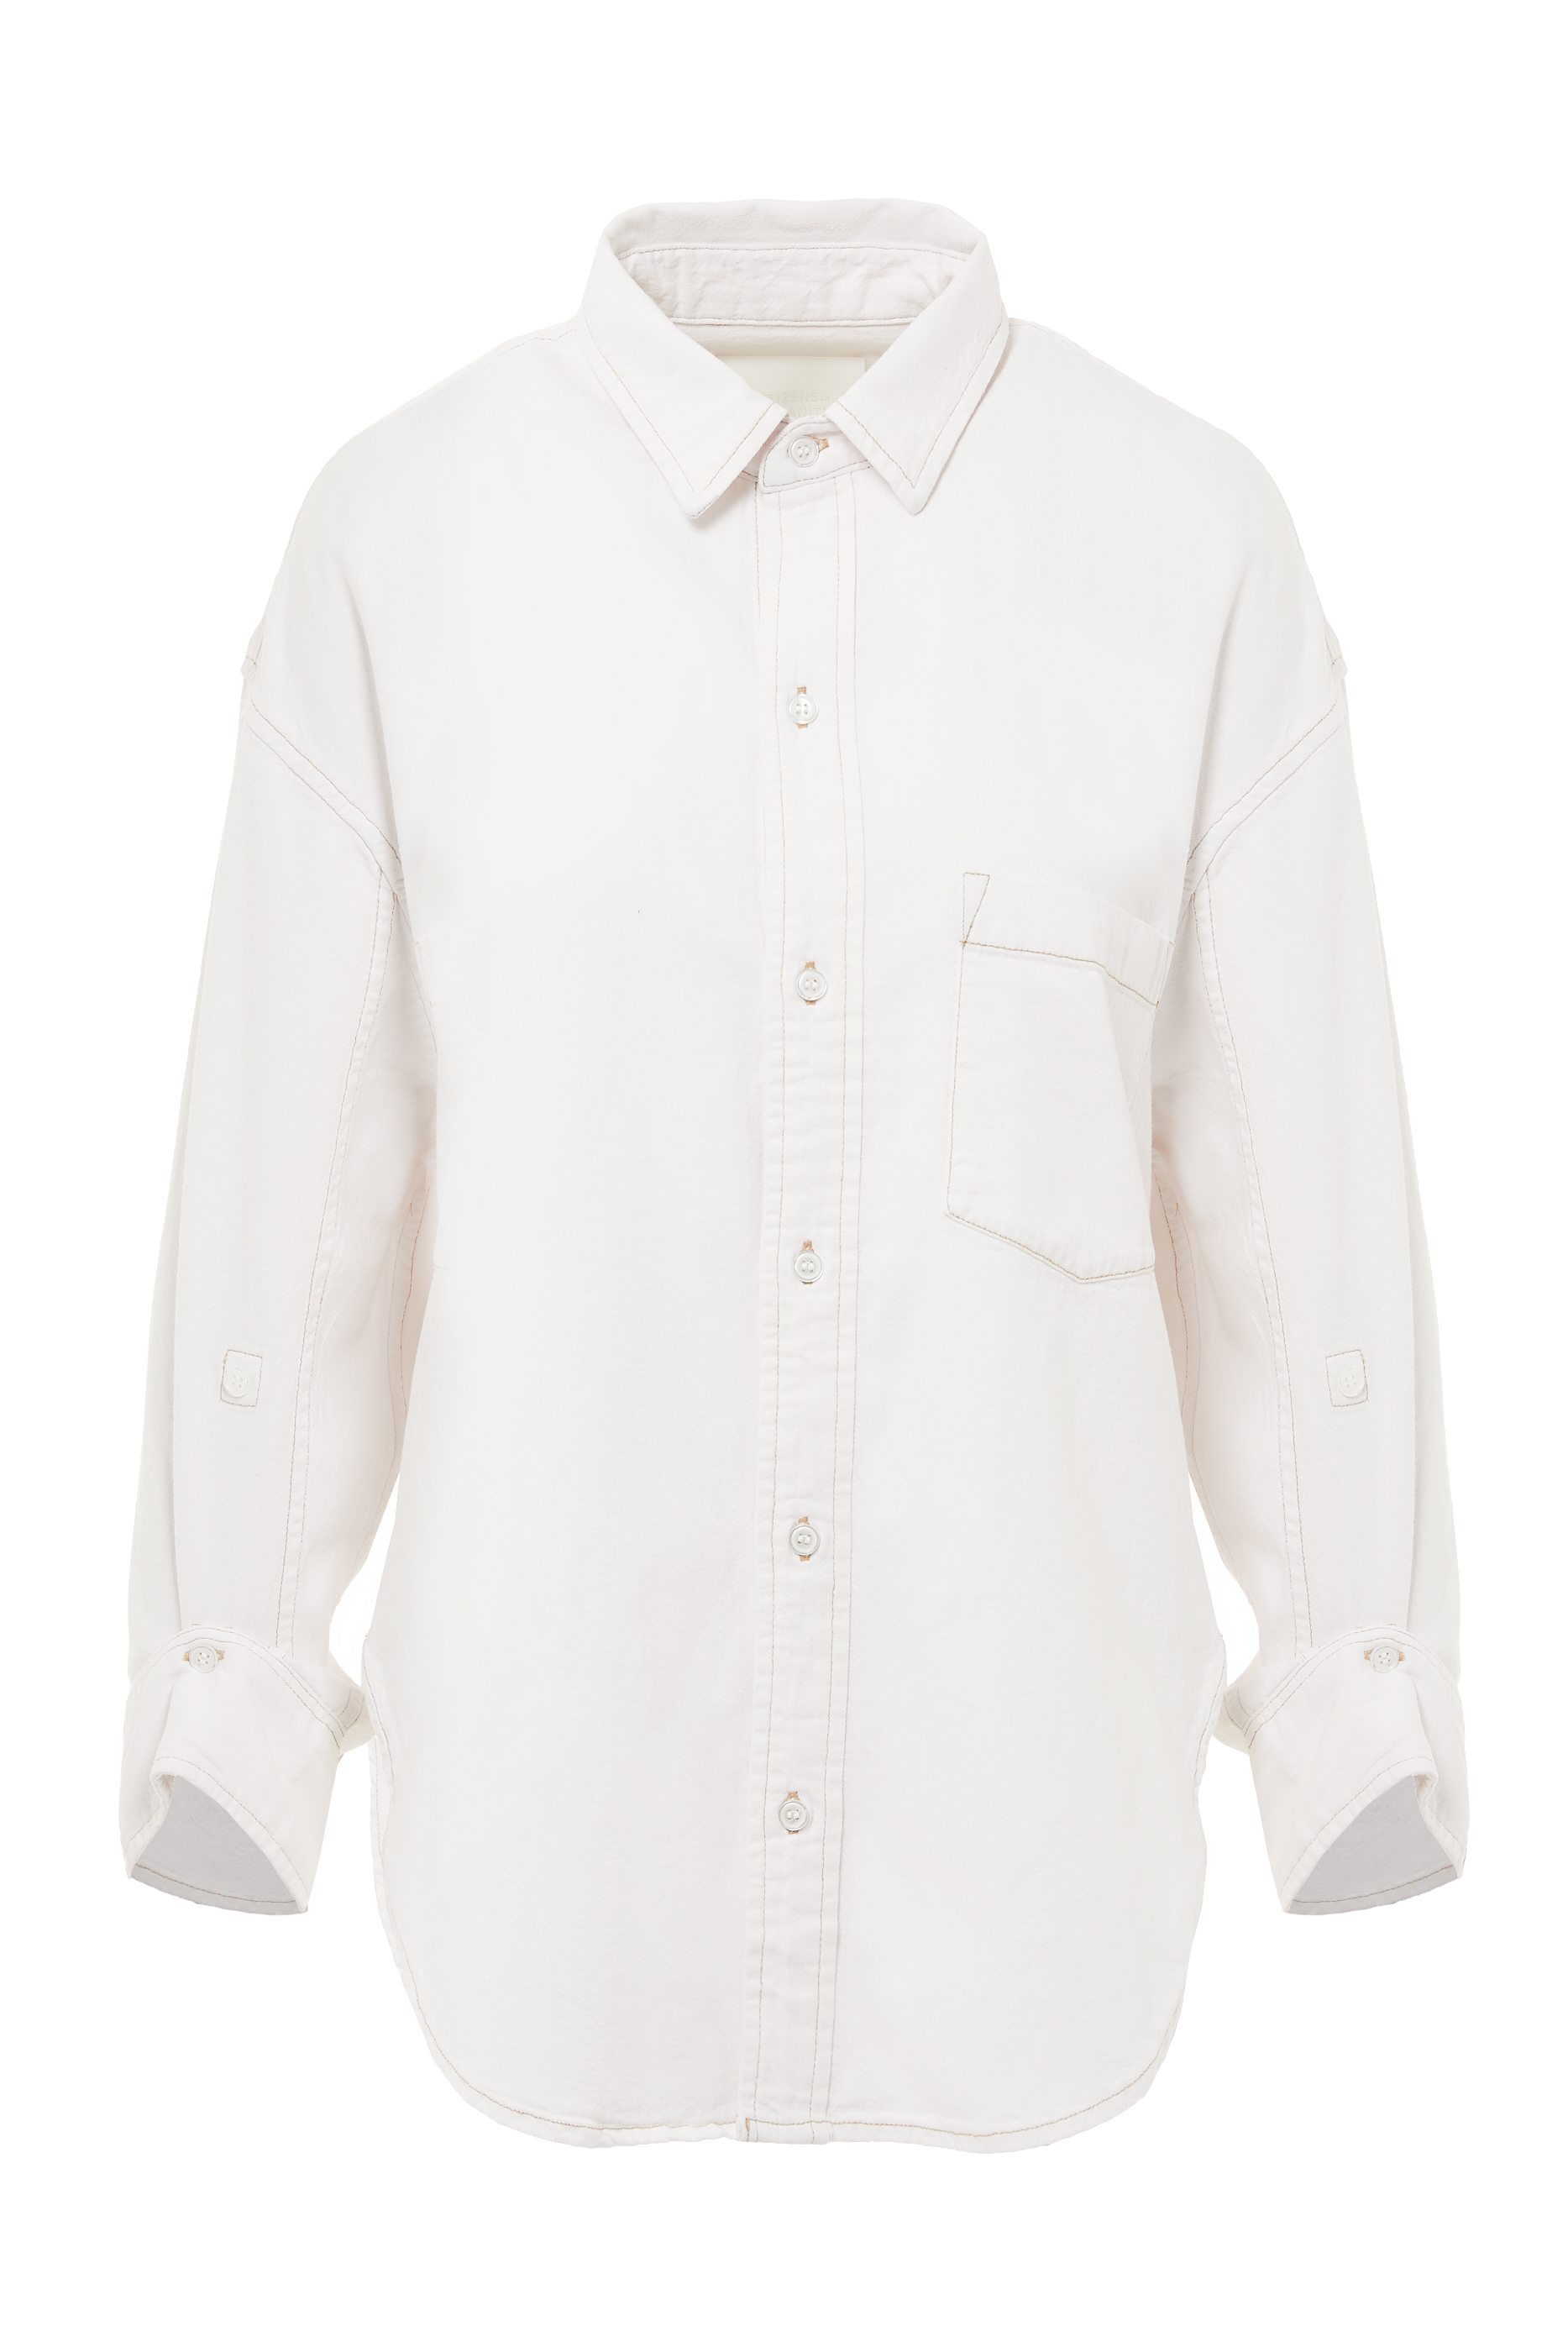 Buy Citizens of Humanity Kayla Cotton Shirt for Womens | Bloomingdale's UAE